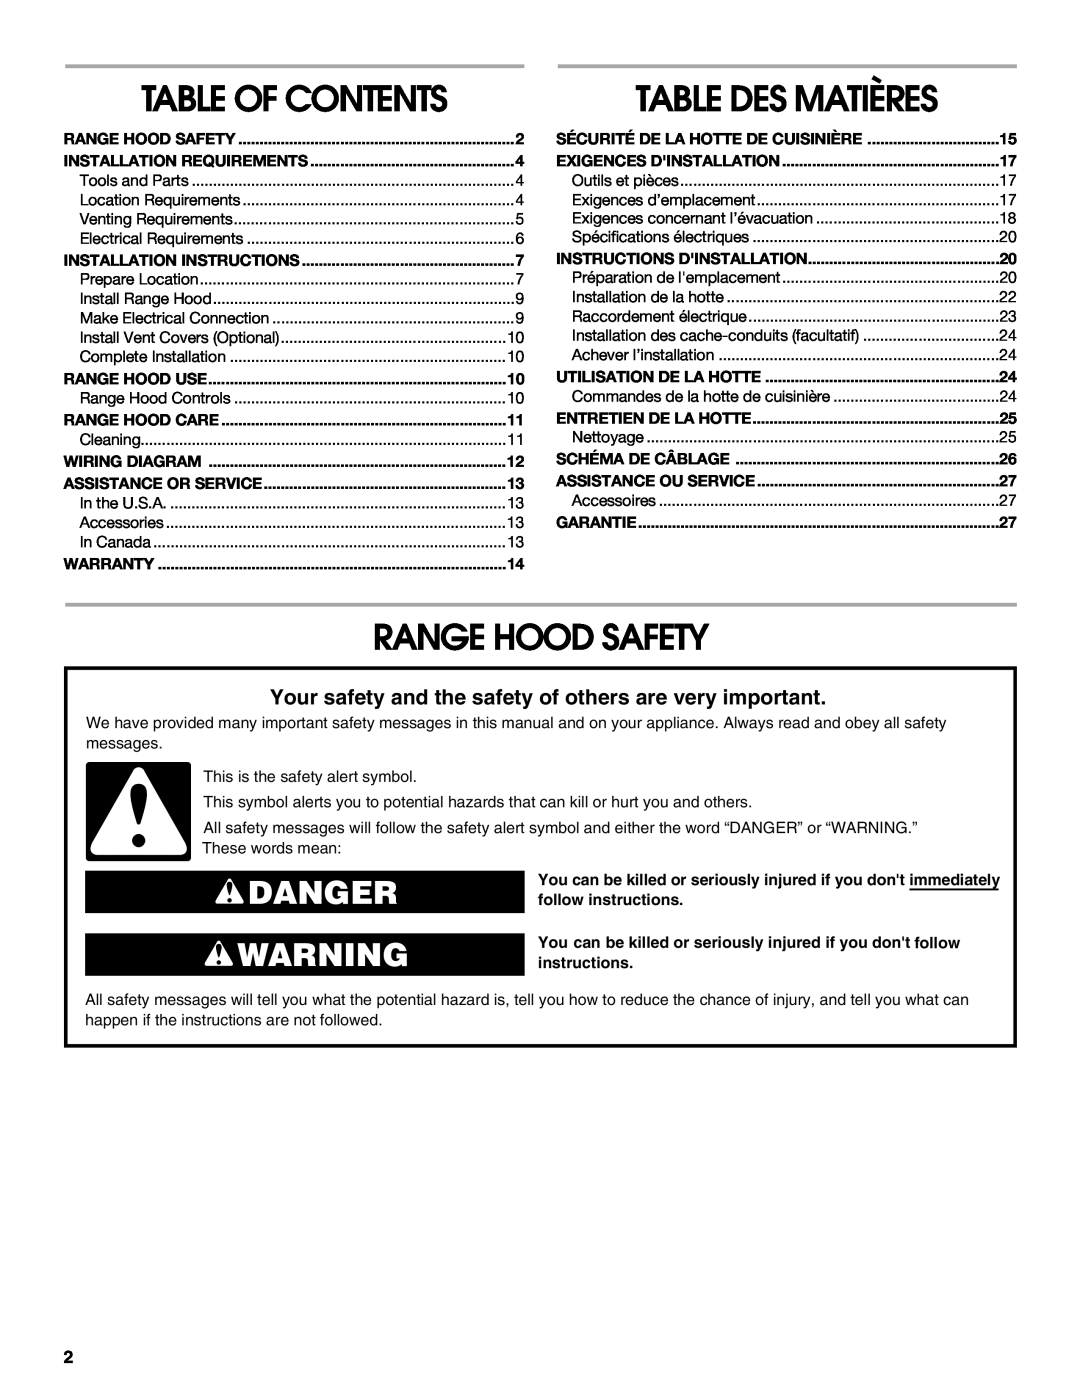 Jenn-Air W10274318A Range Hood Safety, Table Des Matières, Danger, Table Of Contents, Installation Requirements, Warranty 